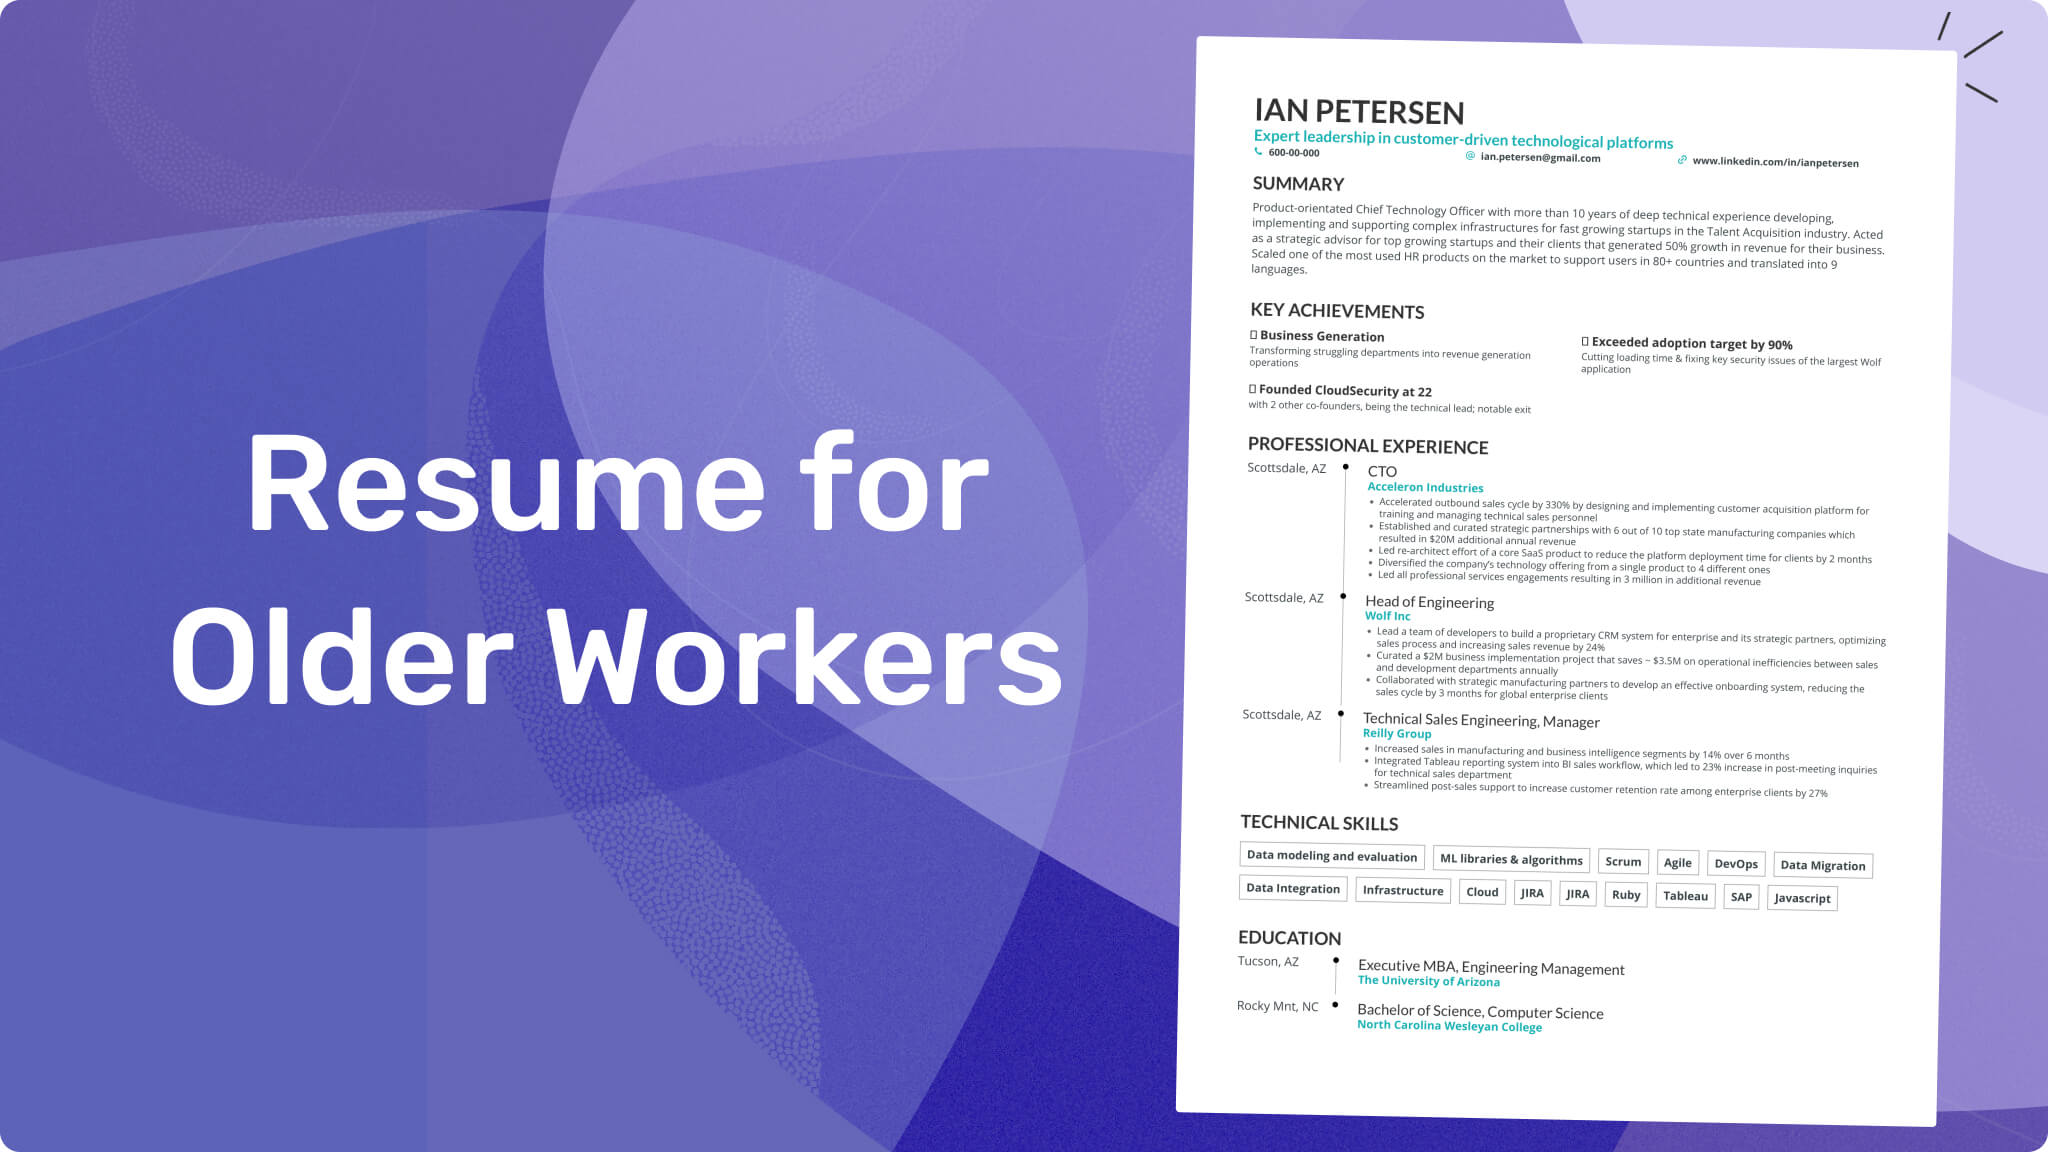 Resume for Older Workers – How To Write a Resume for 25+ Years of Experience